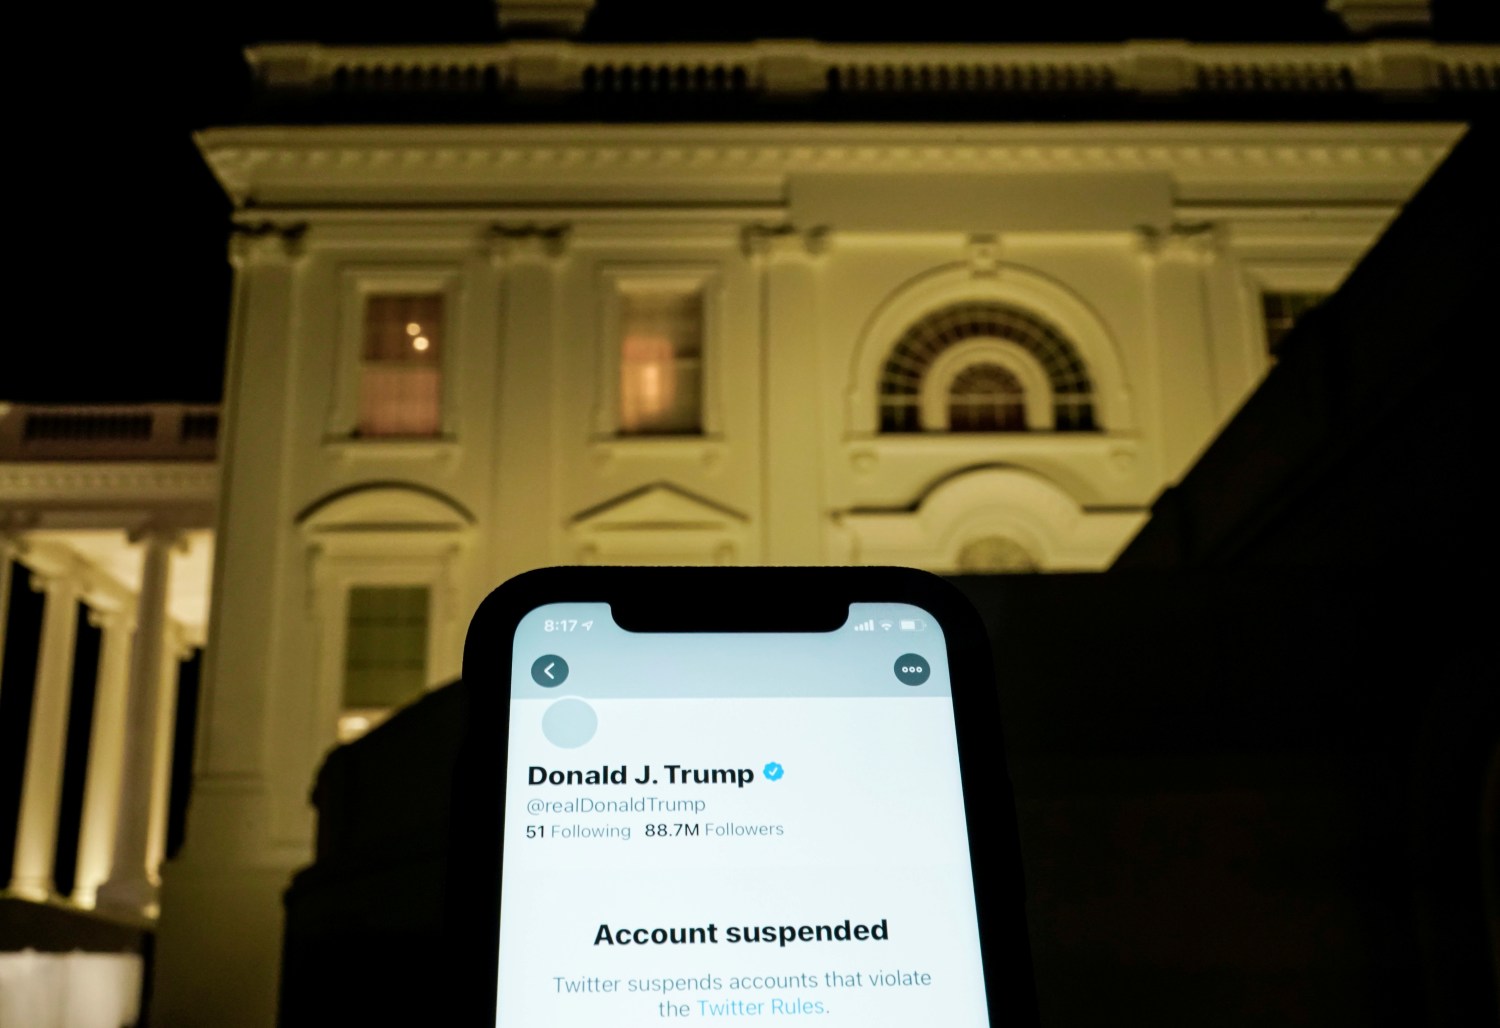 A photo illustration shows the suspended Twitter account of former President Donald Trump on a smartphone in front of the White House.